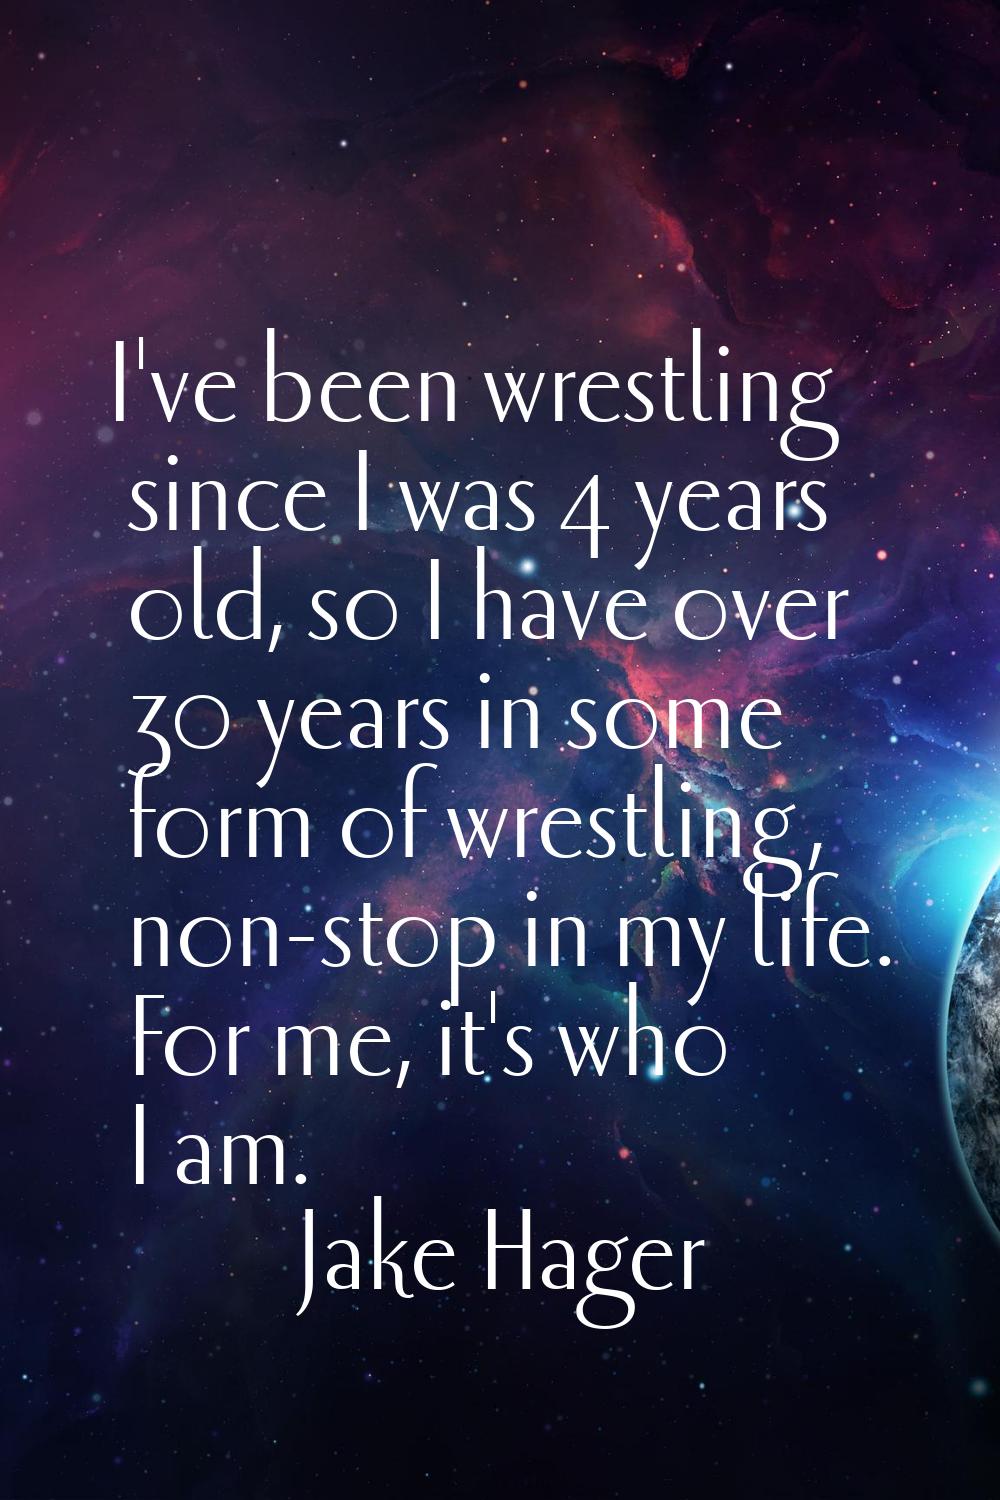 I've been wrestling since I was 4 years old, so I have over 30 years in some form of wrestling, non